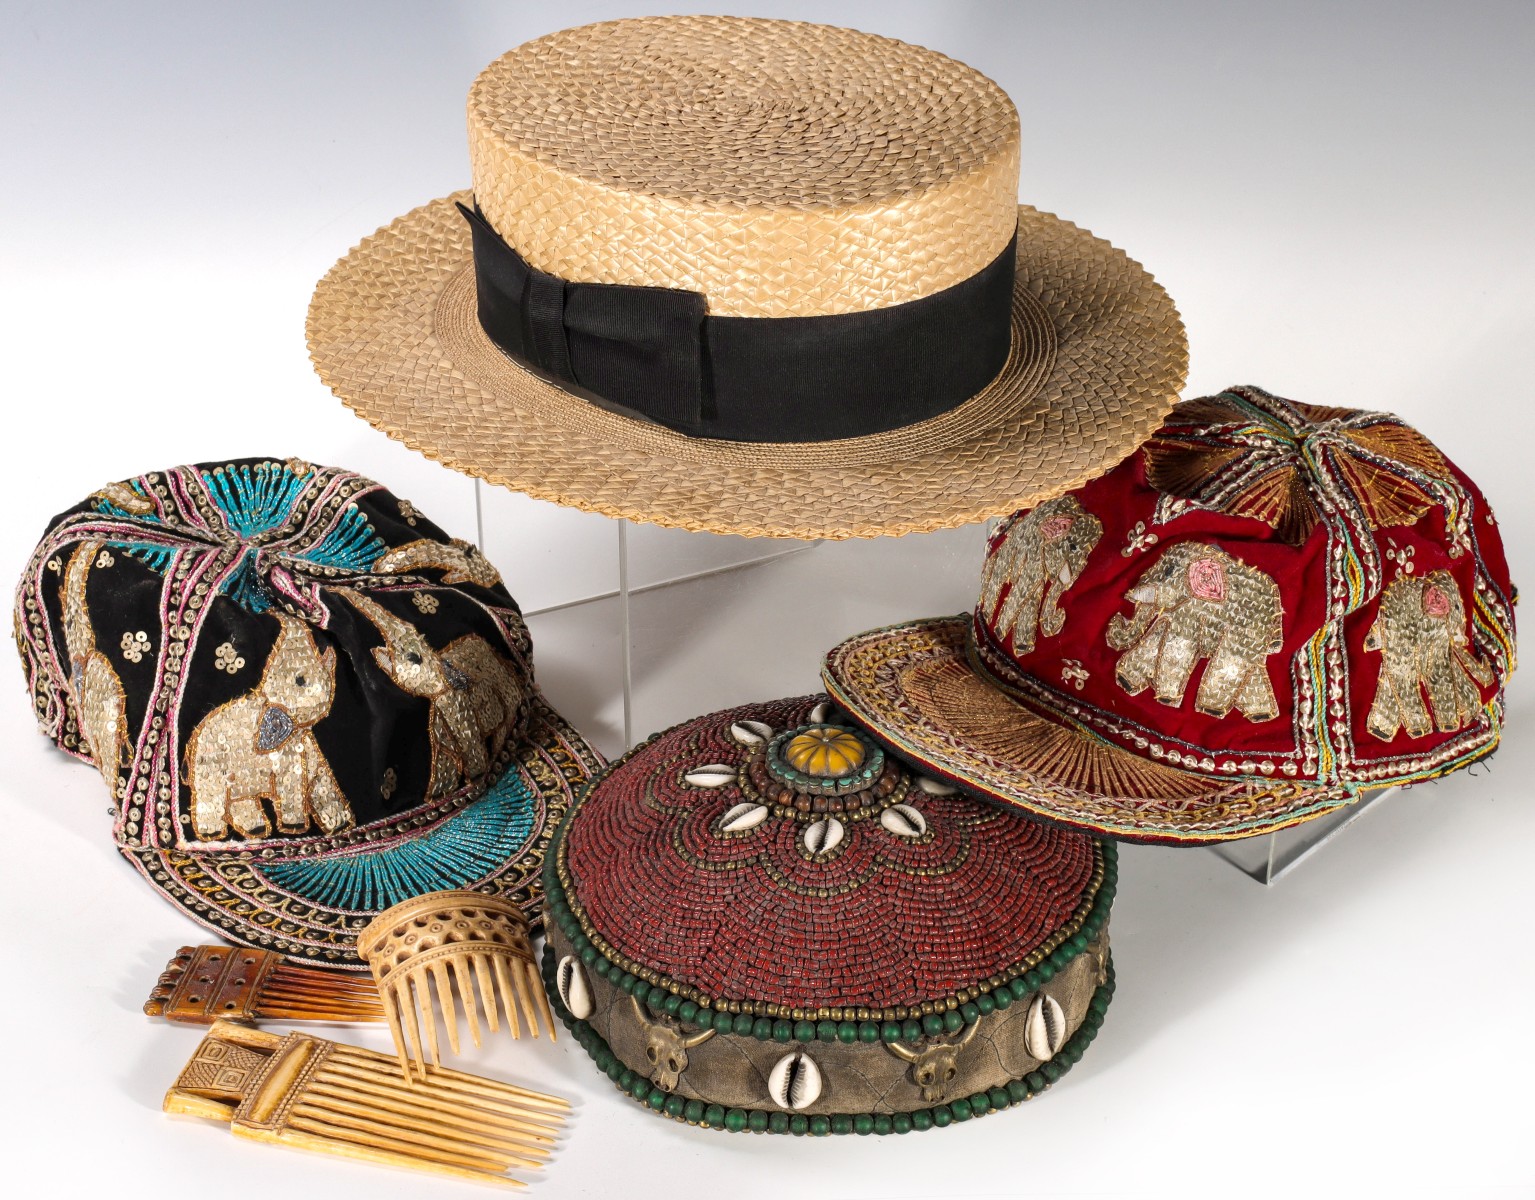 A COLLECTION OF HATS FROM VARIOUS CULTURES